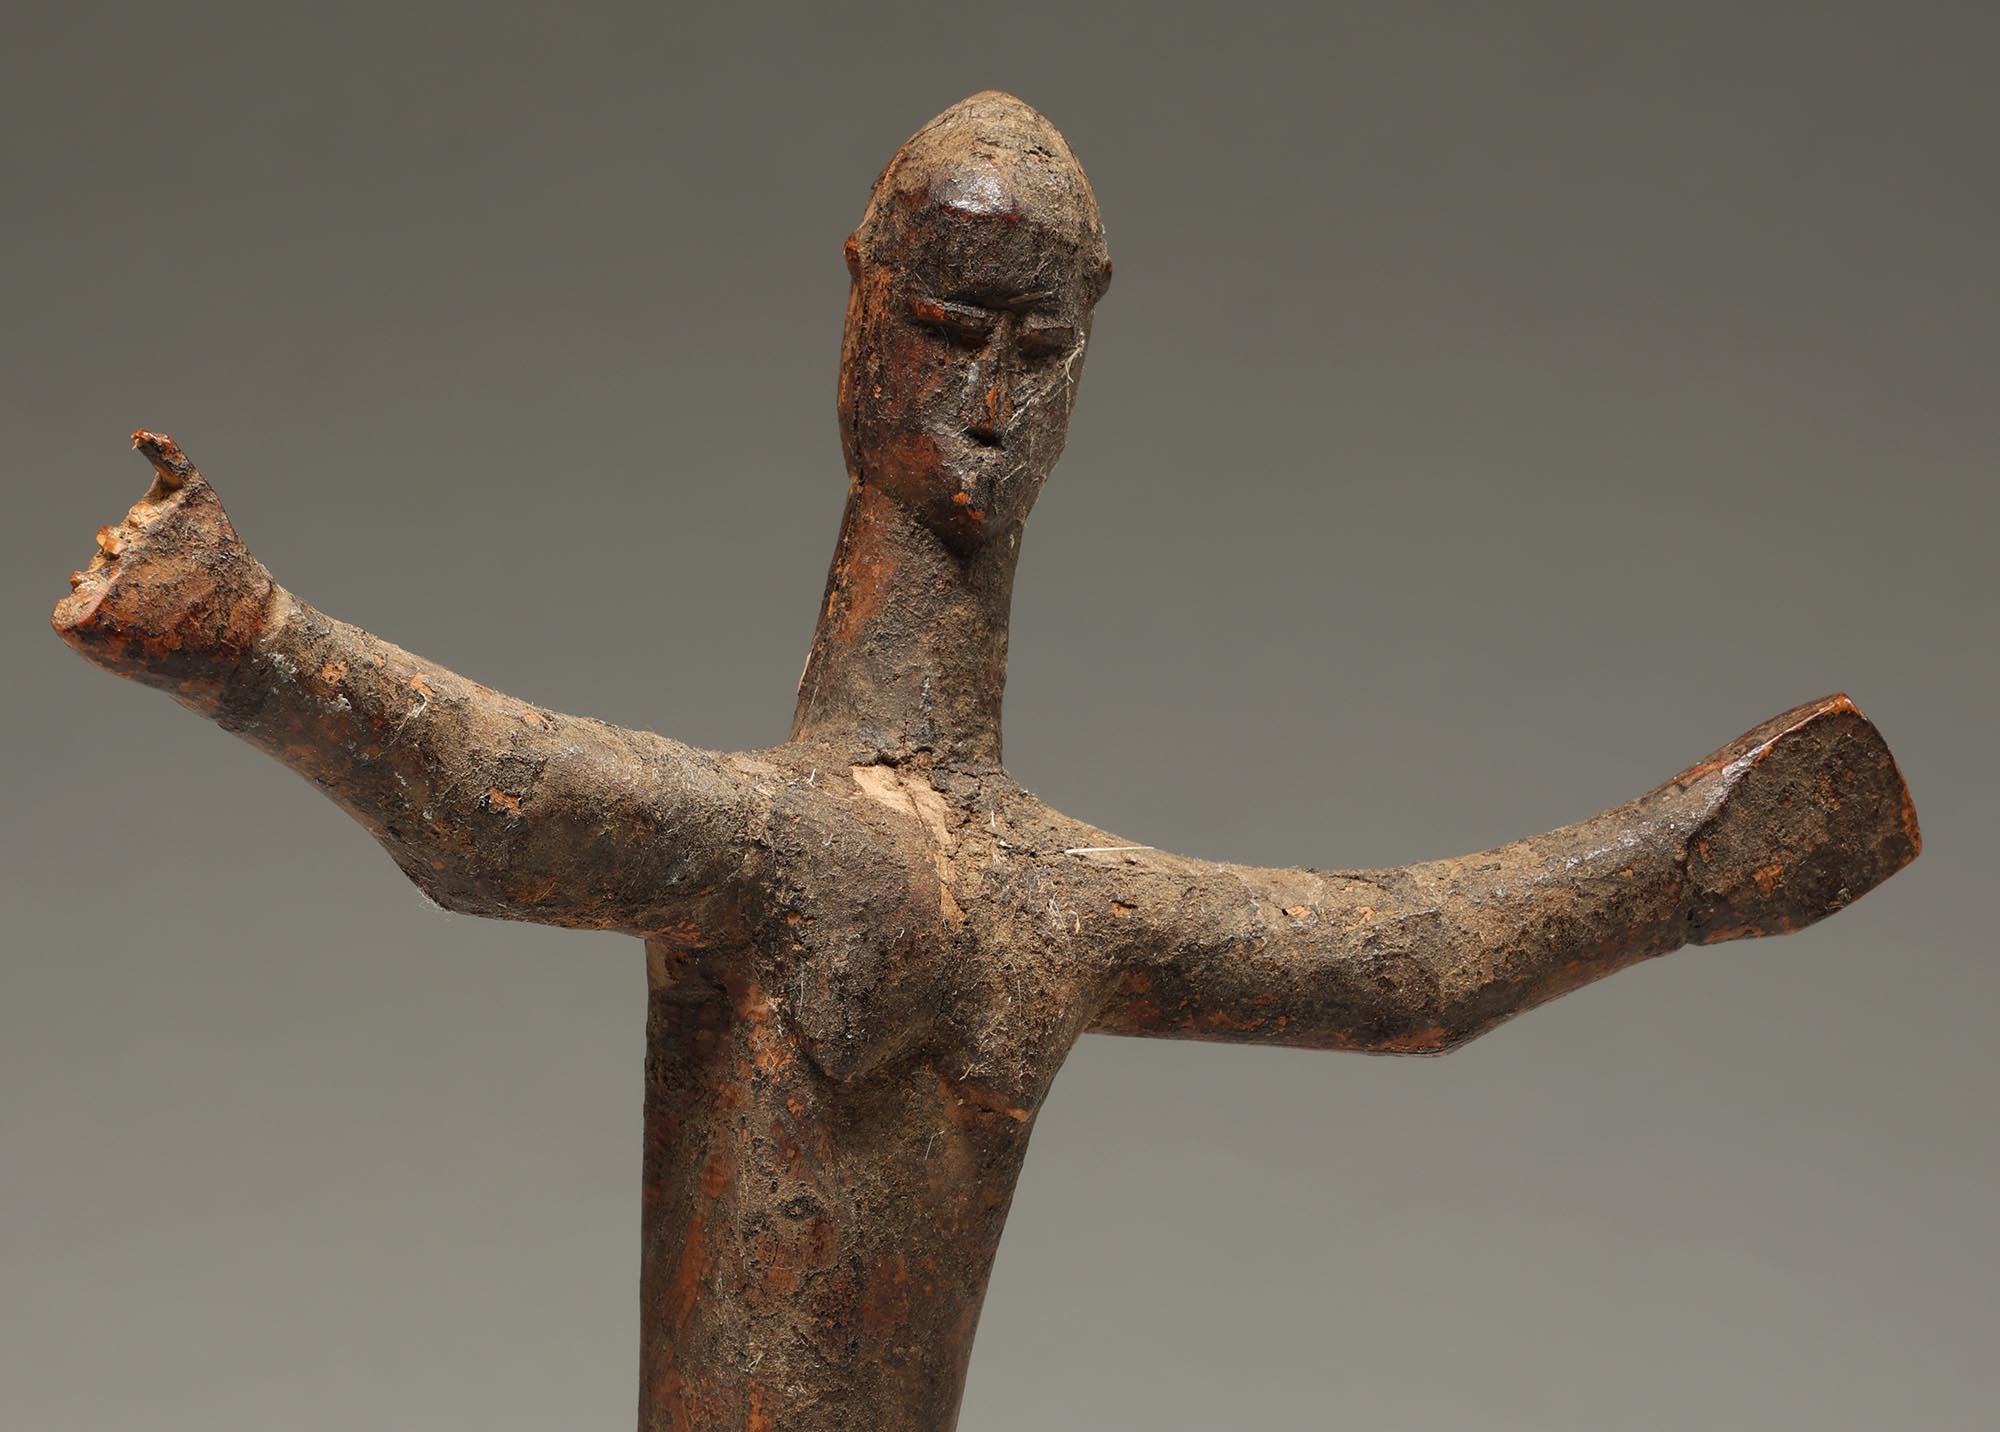 Small dancing Lobi figure with arms out, and cubist face from Ghana, West Africa. ex James Willis, San Francisco, CA.  Damage to proper right hand, fingers absent.  Heavy encrusted patina from ritual use in a shrine.  Wonderful movement and